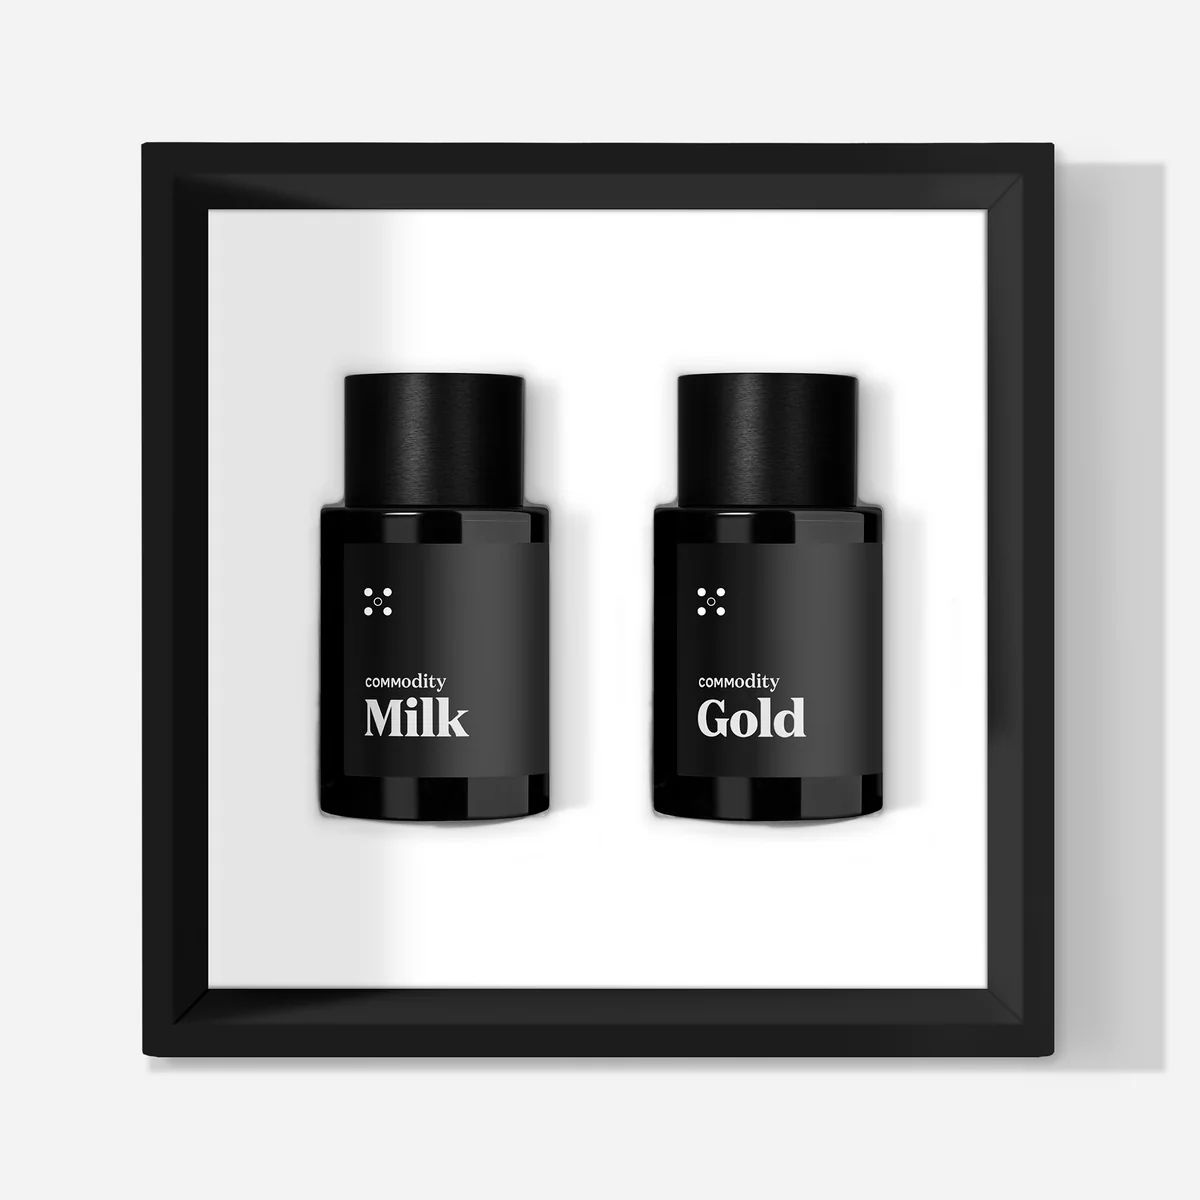 Bestsellers 30ml Duo Set | Commodity Fragrances (US)